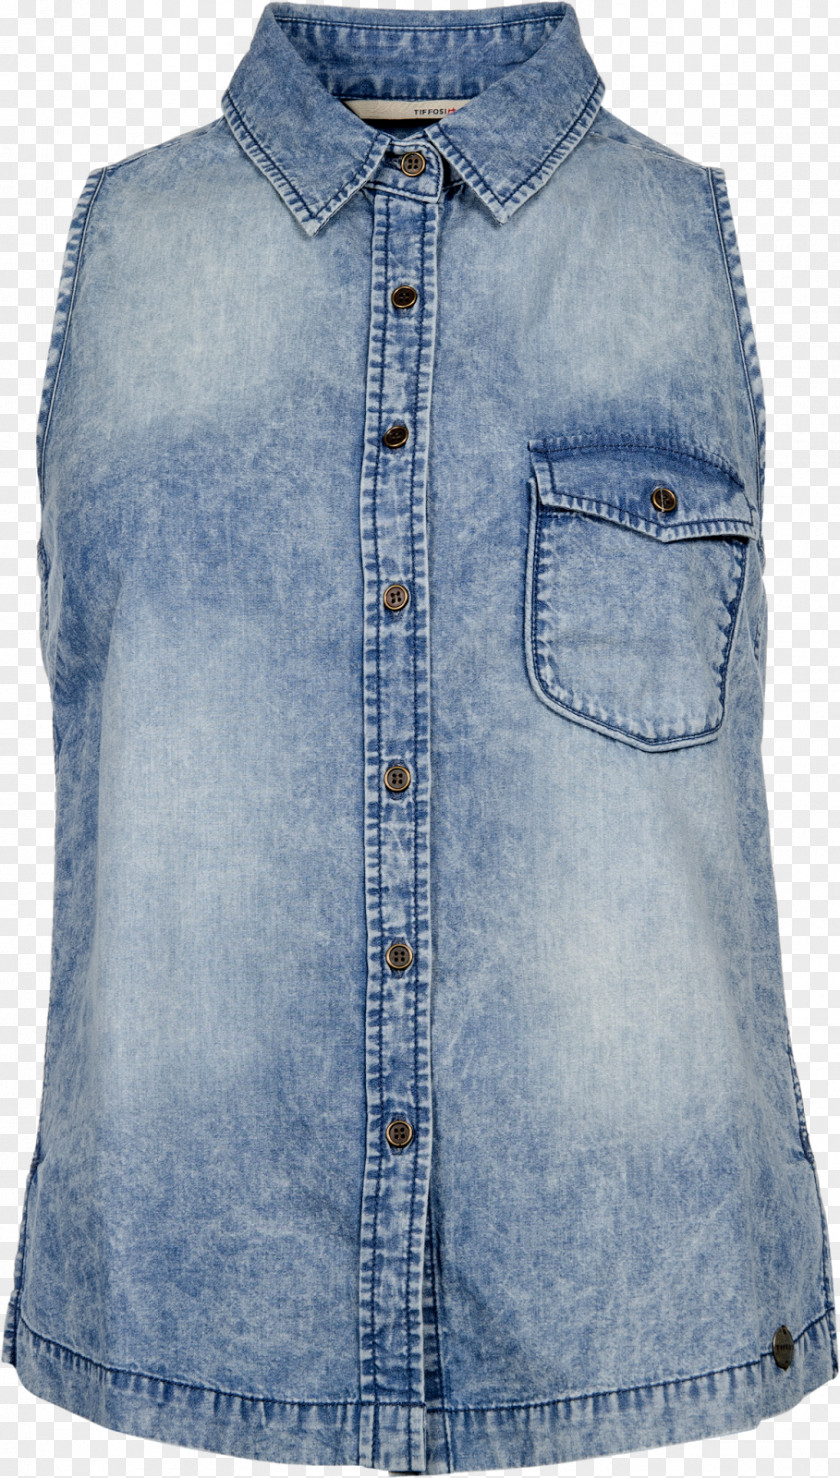 Jeans Blouse Clothing Outerwear Ola PNG